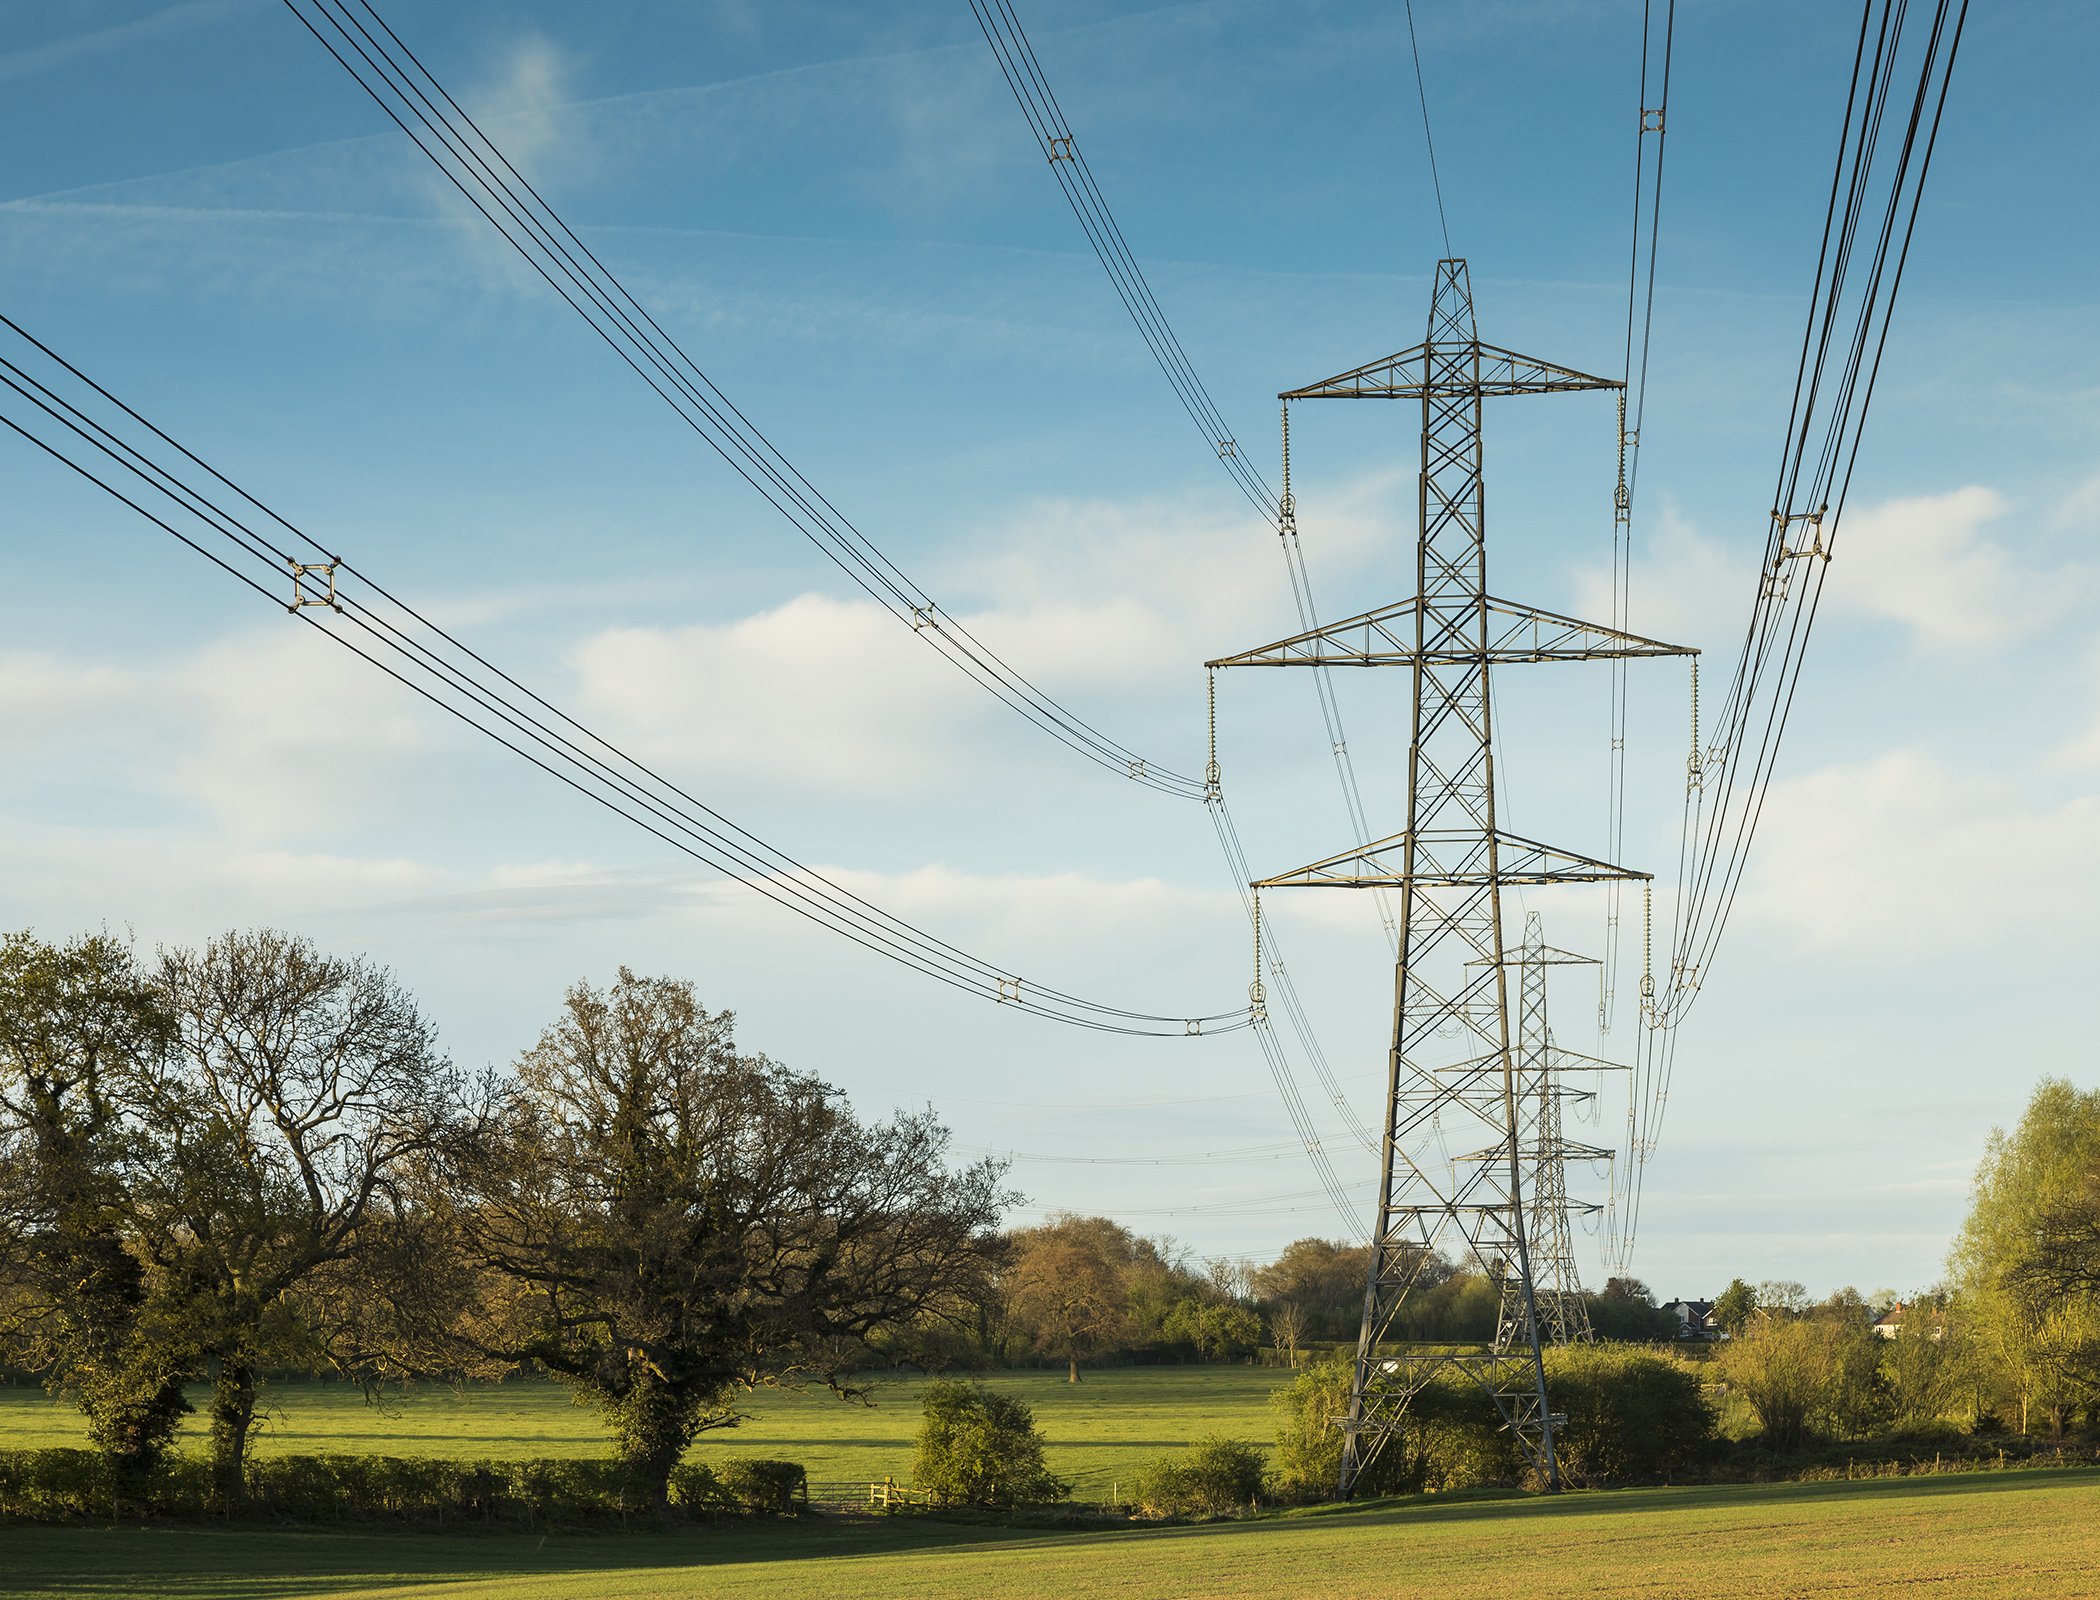 Most Britons want energy grid to be expanded to support renewables